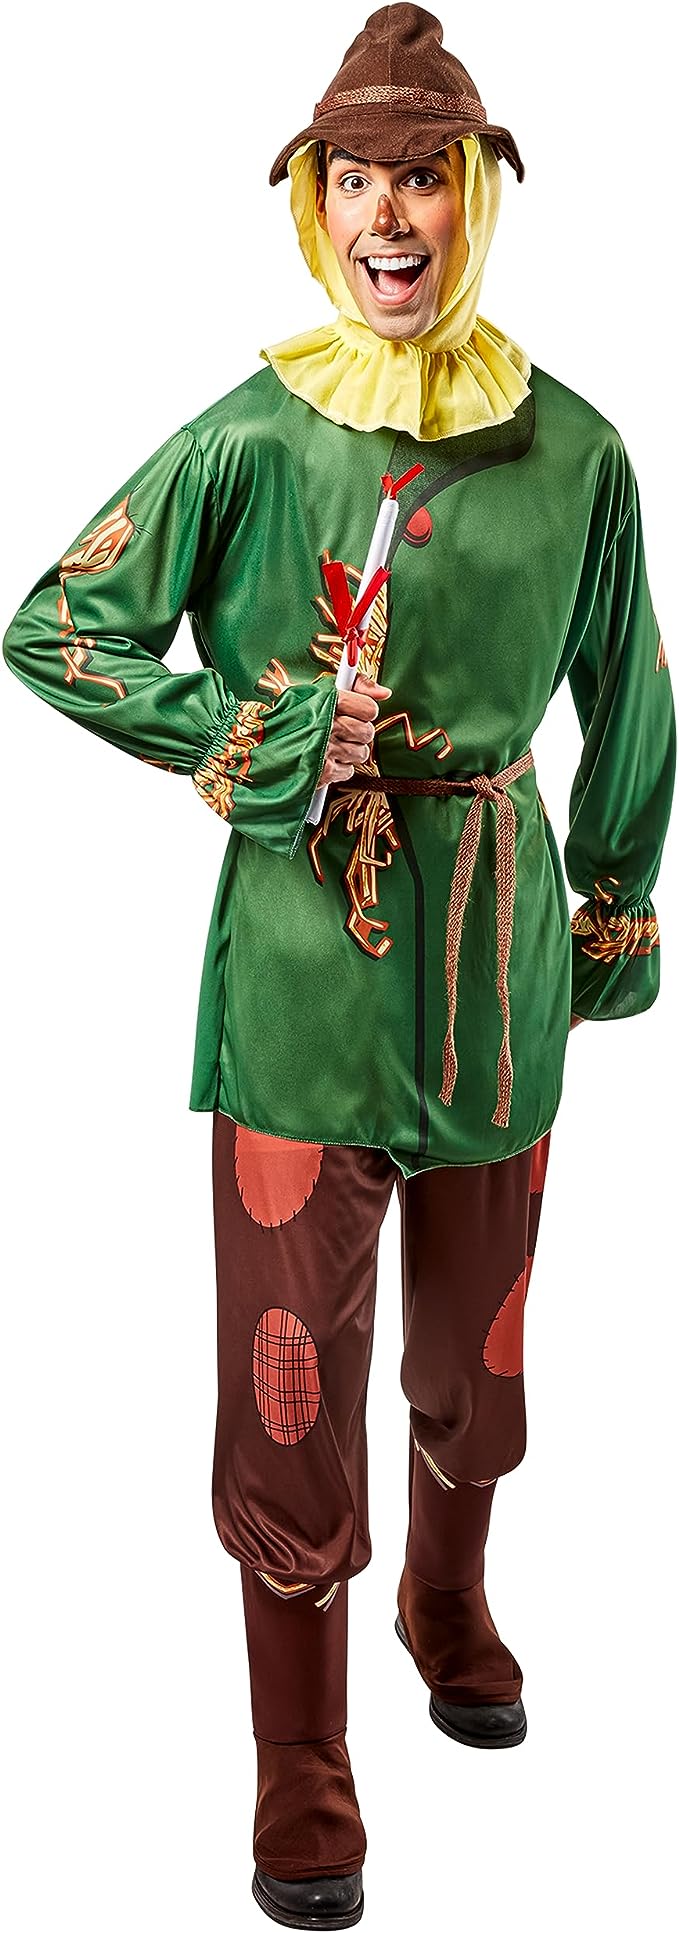 The Wizard of Oz - Scarecrow - Adult Costume